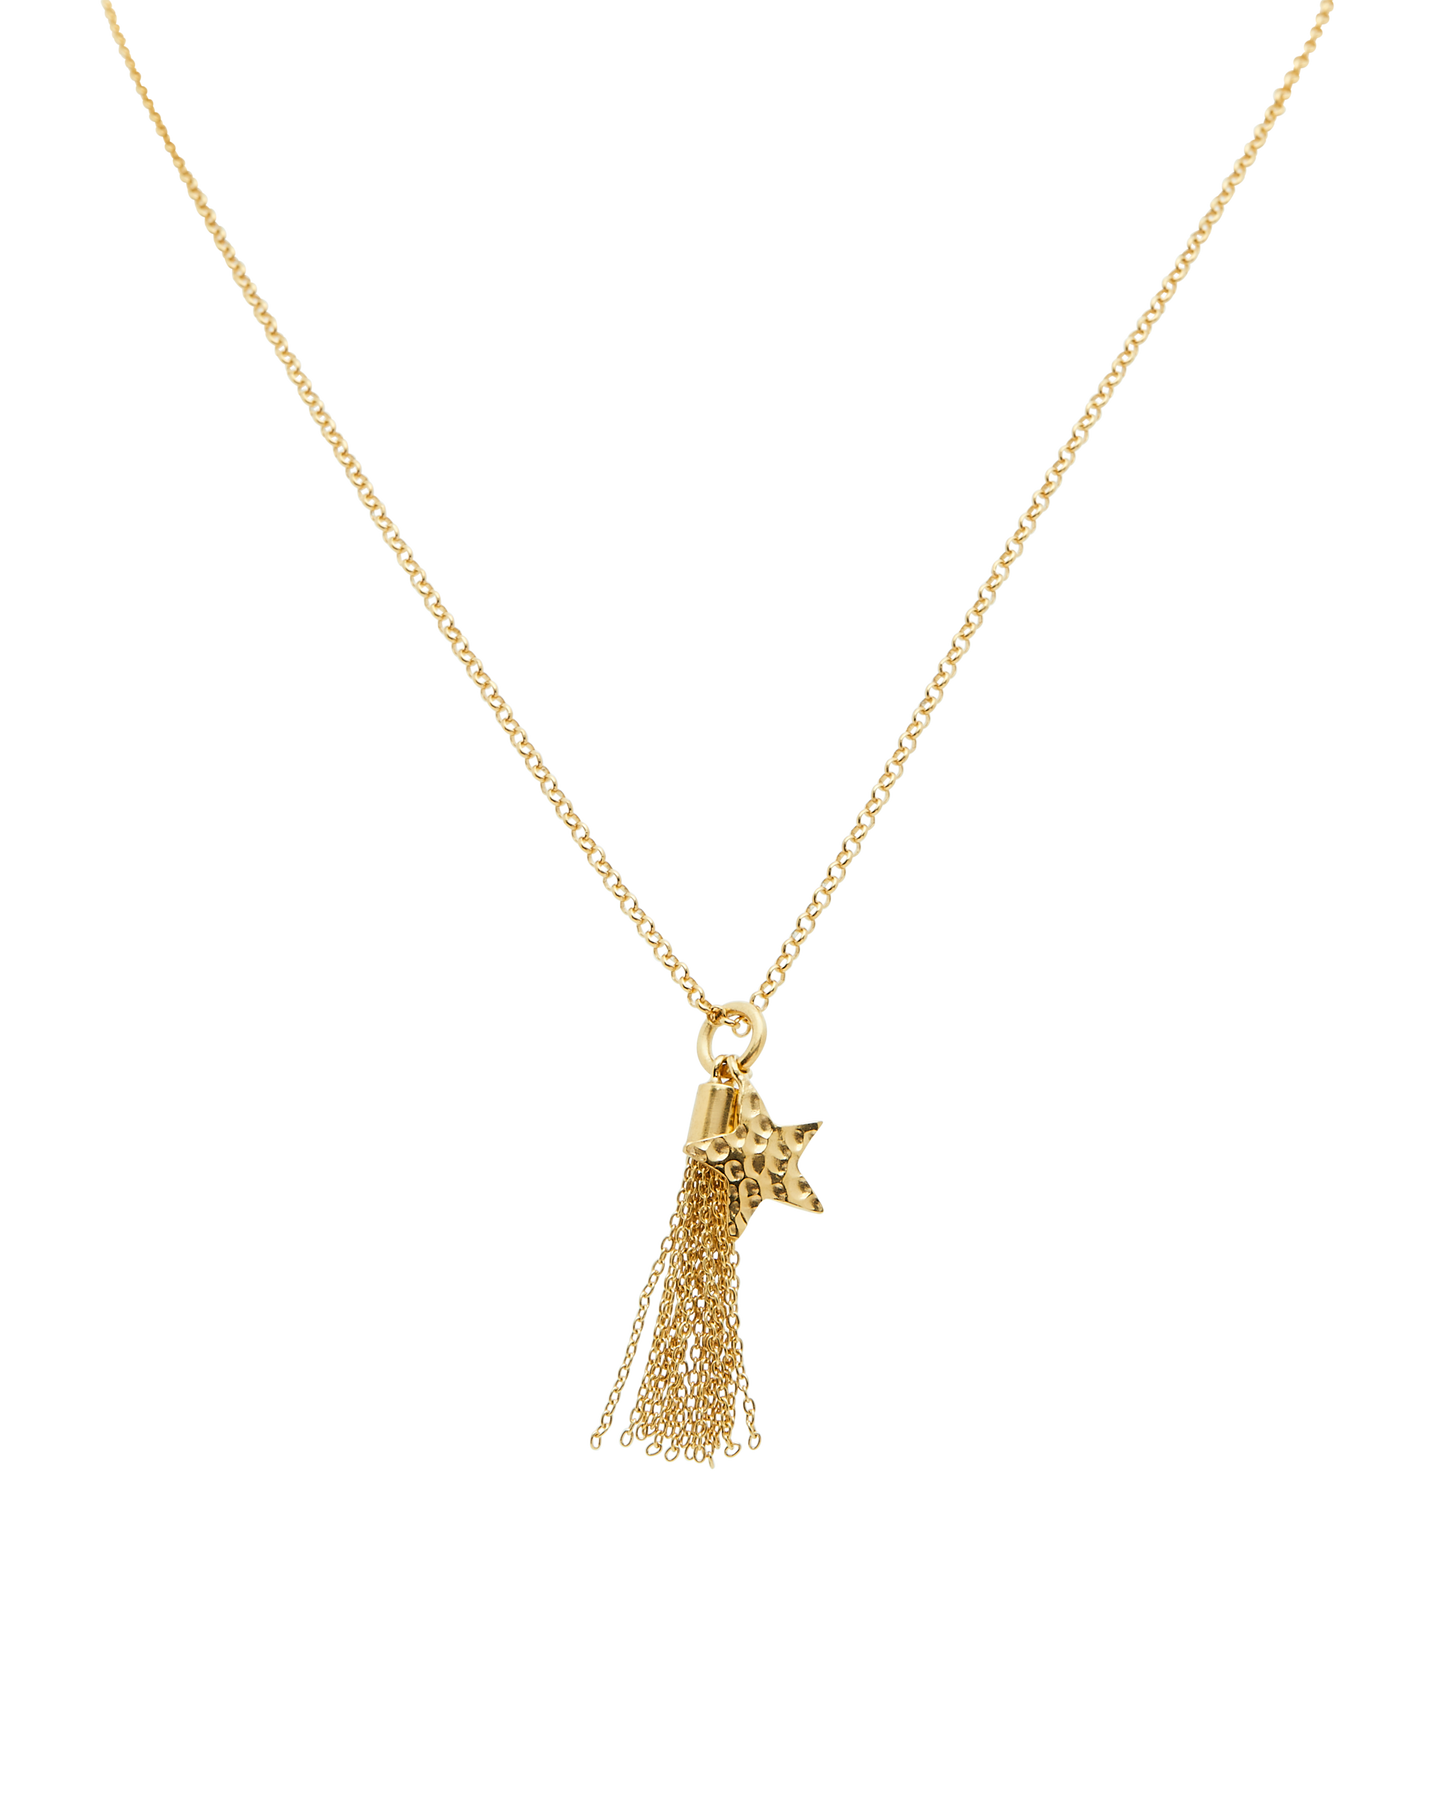 Gold Shooting Star Tassle Necklace